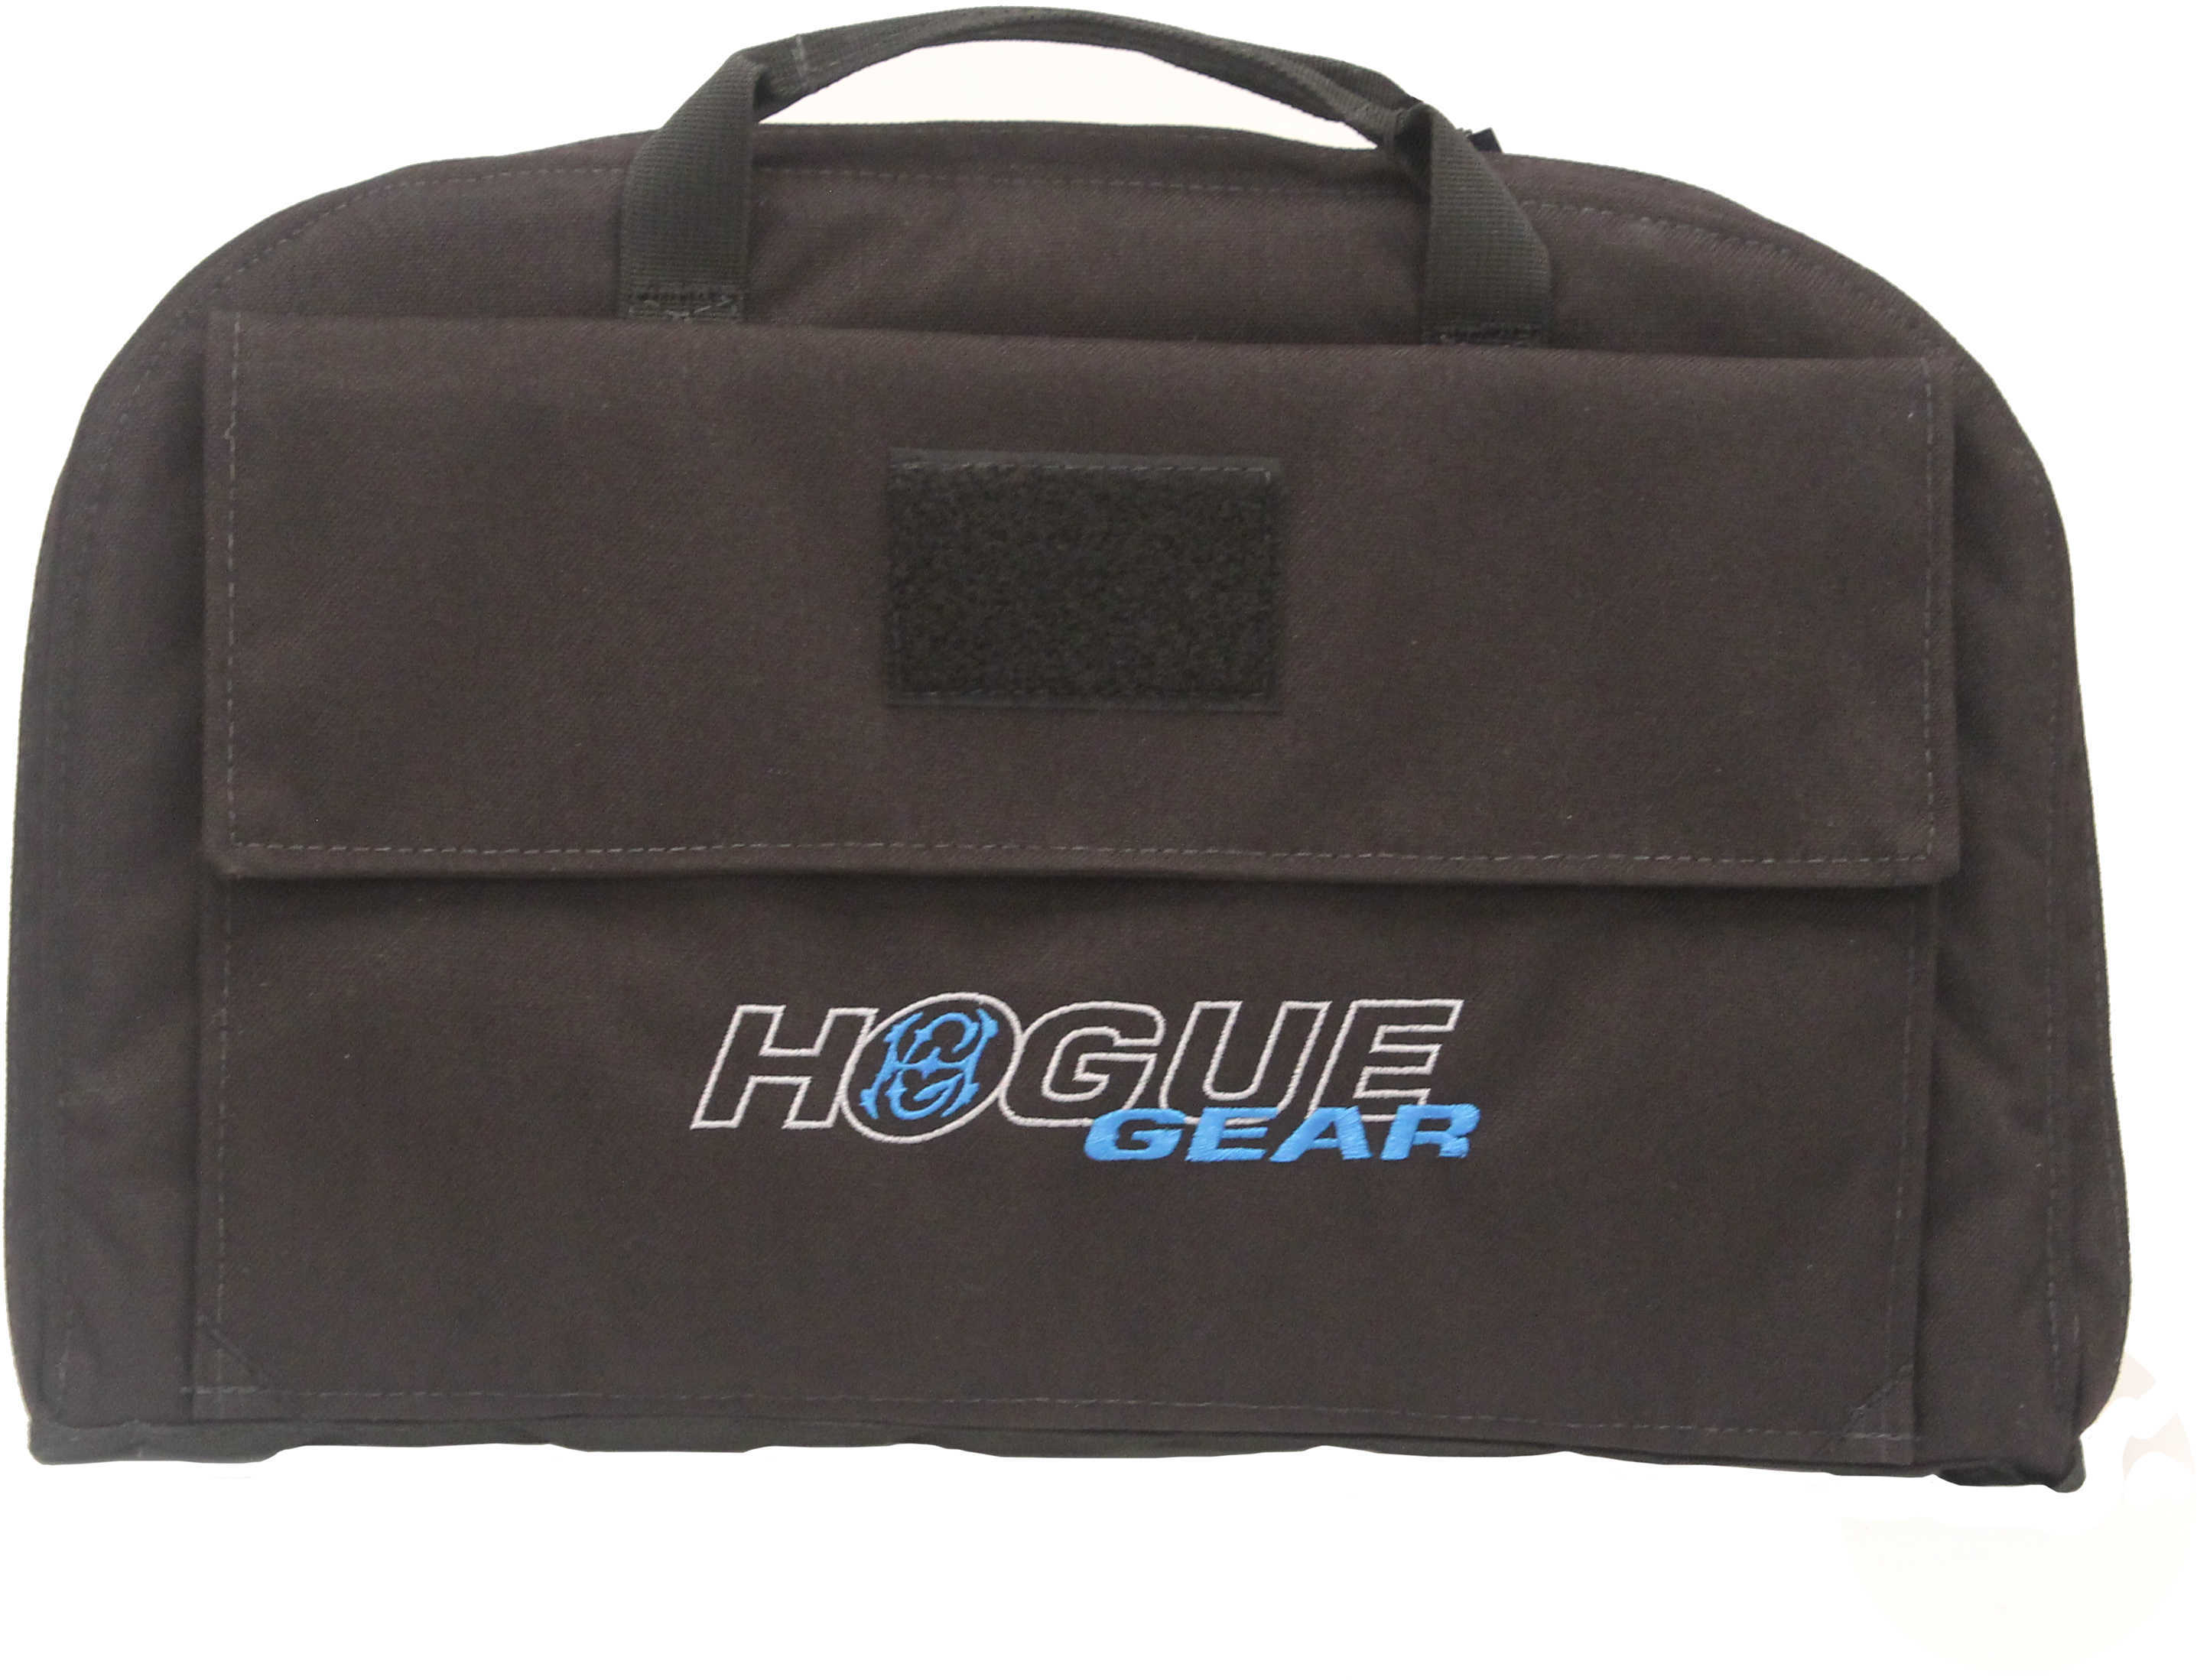 Hogue Grips Gear Pistol Bag 10"x16" Black with Front Pocket and Handles 59270